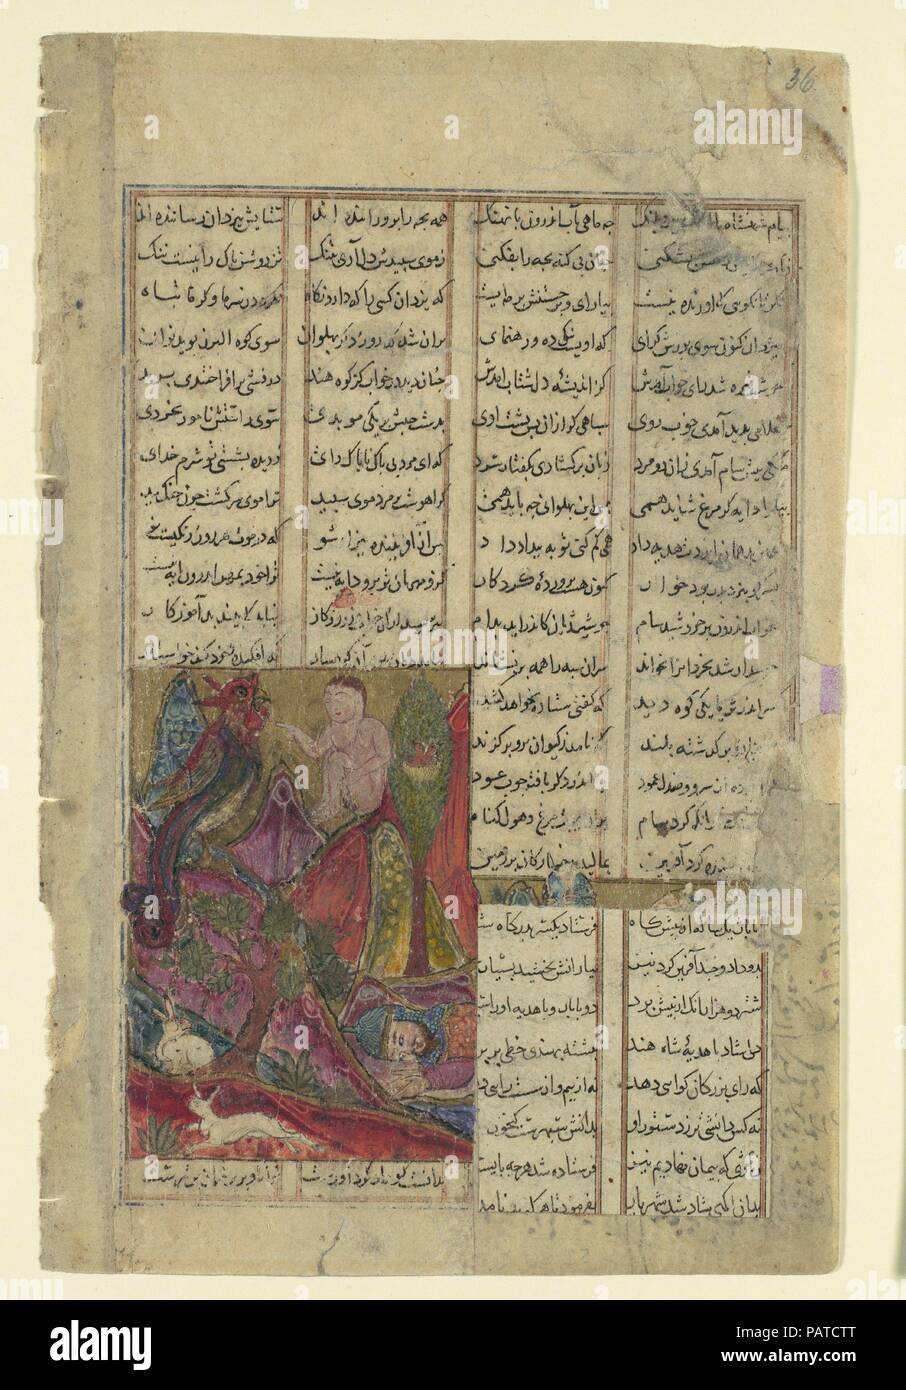 'Zal in the Simurgh's Nest', Folio from a Shahnama (Book of Kings). Author: Abu'l Qasim Firdausi (935-1020). Dimensions: Page: 8 x 5 1/8 in. (20.3 x 13 cm)  Painting: 3 3/16 x 2 3/16 in. (8.1 x 5.6 cm). Date: ca. 1330-40.  Left in the wilderness as a baby because his father Sam thought his white hair was an attribute of the devil, Zal was rescued by the Simurgh and taken to her nest on Mt. Elburz.  Rumors eventually reached Sam, who came to reclaim his son and to thank the great bird. In spite of the damage to the lower right hand portion of this stepped composition, the painting is striking,  Stock Photo